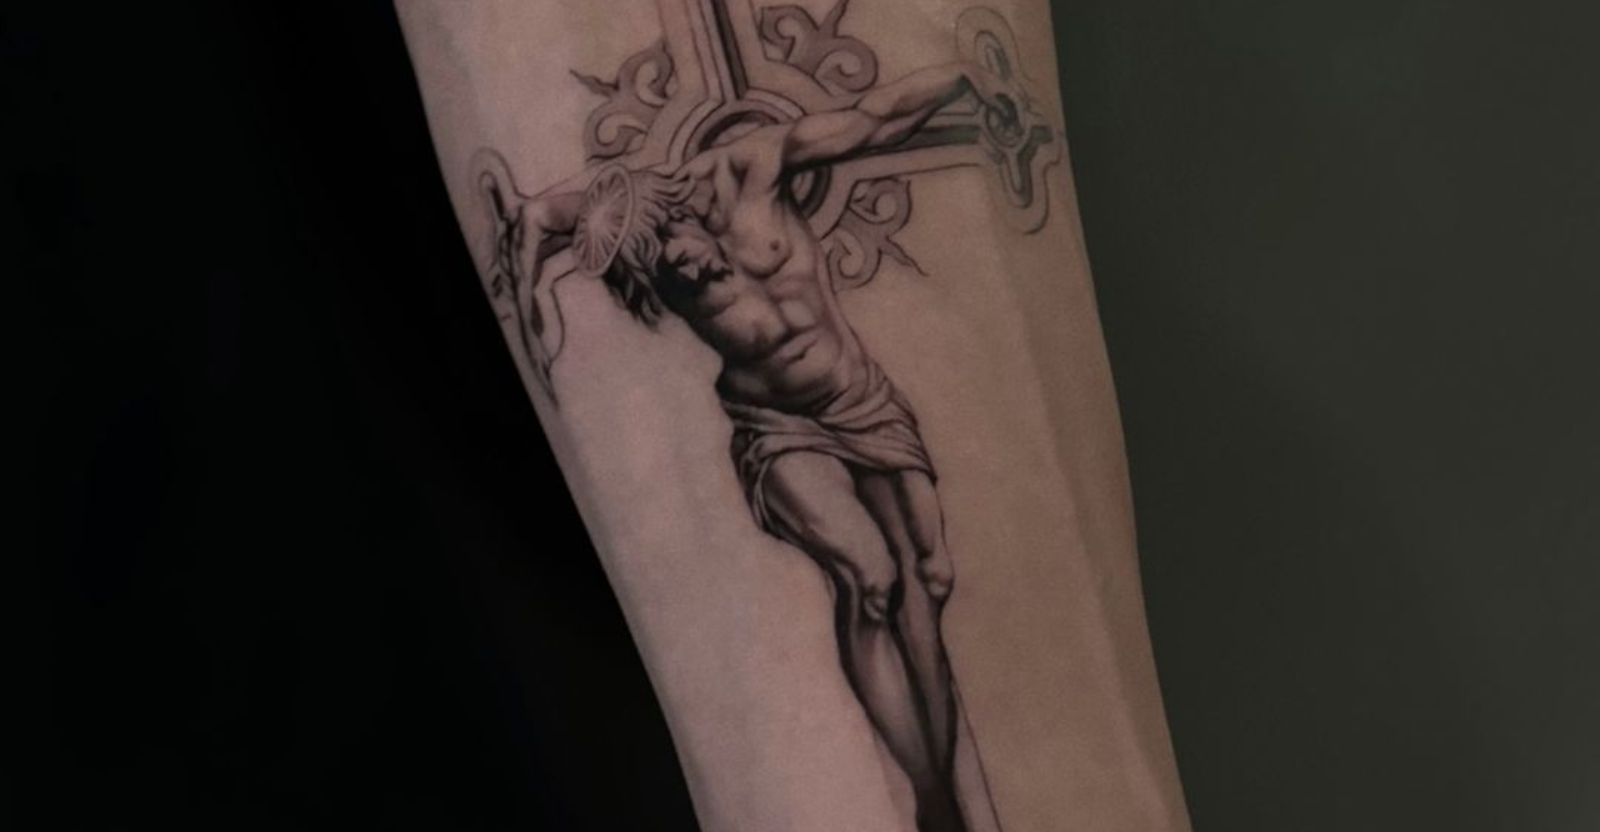 75+ Unbeaten Faith Tattoo Ideas with Meanings You'll Love — InkMatch